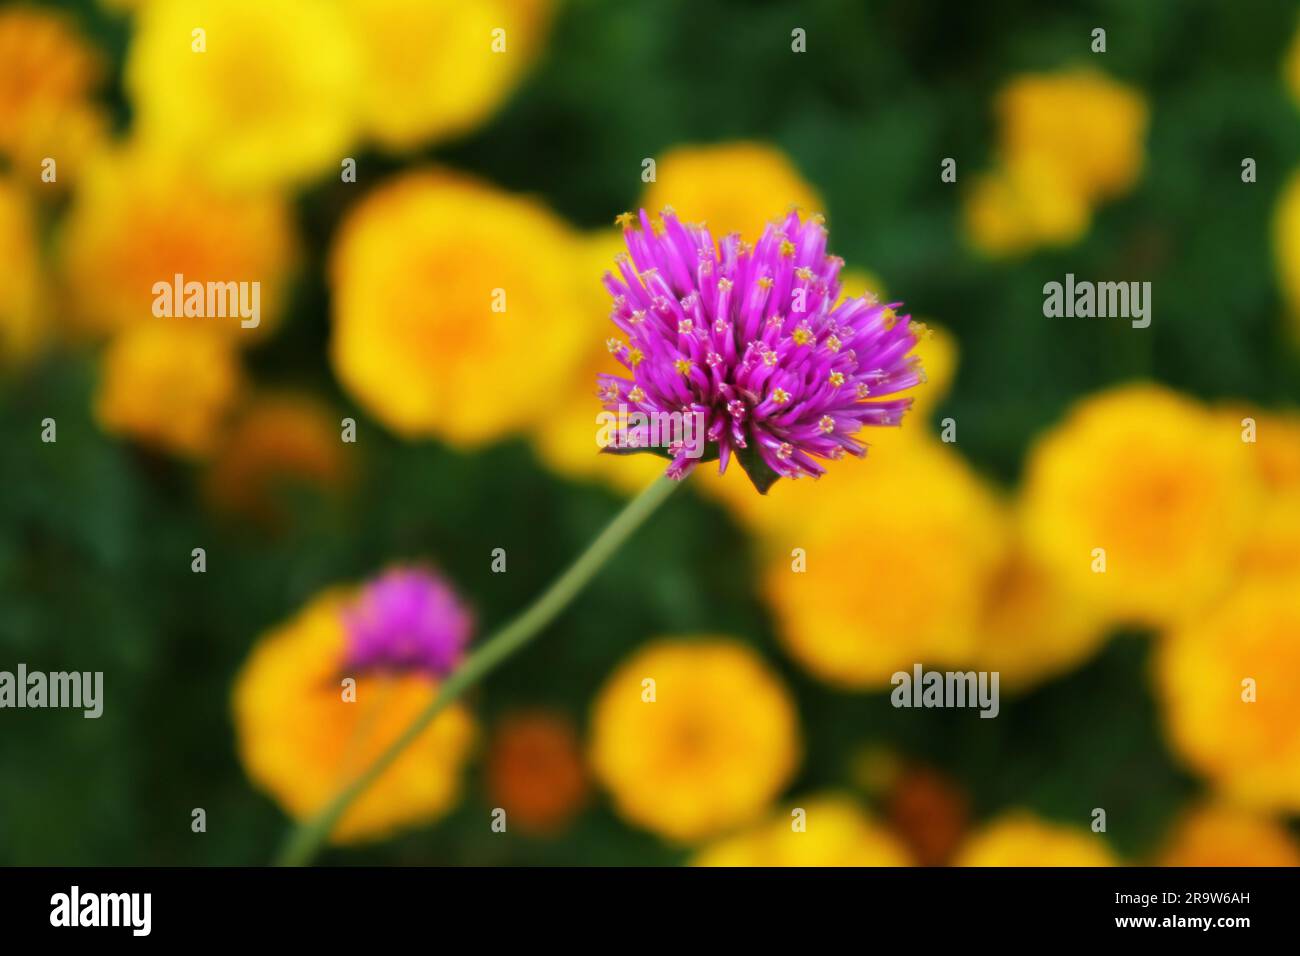 Closeup of Firework Flower or Gomphrena Pulchella with Blurry Marigolds in the Backdrop Stock Photo